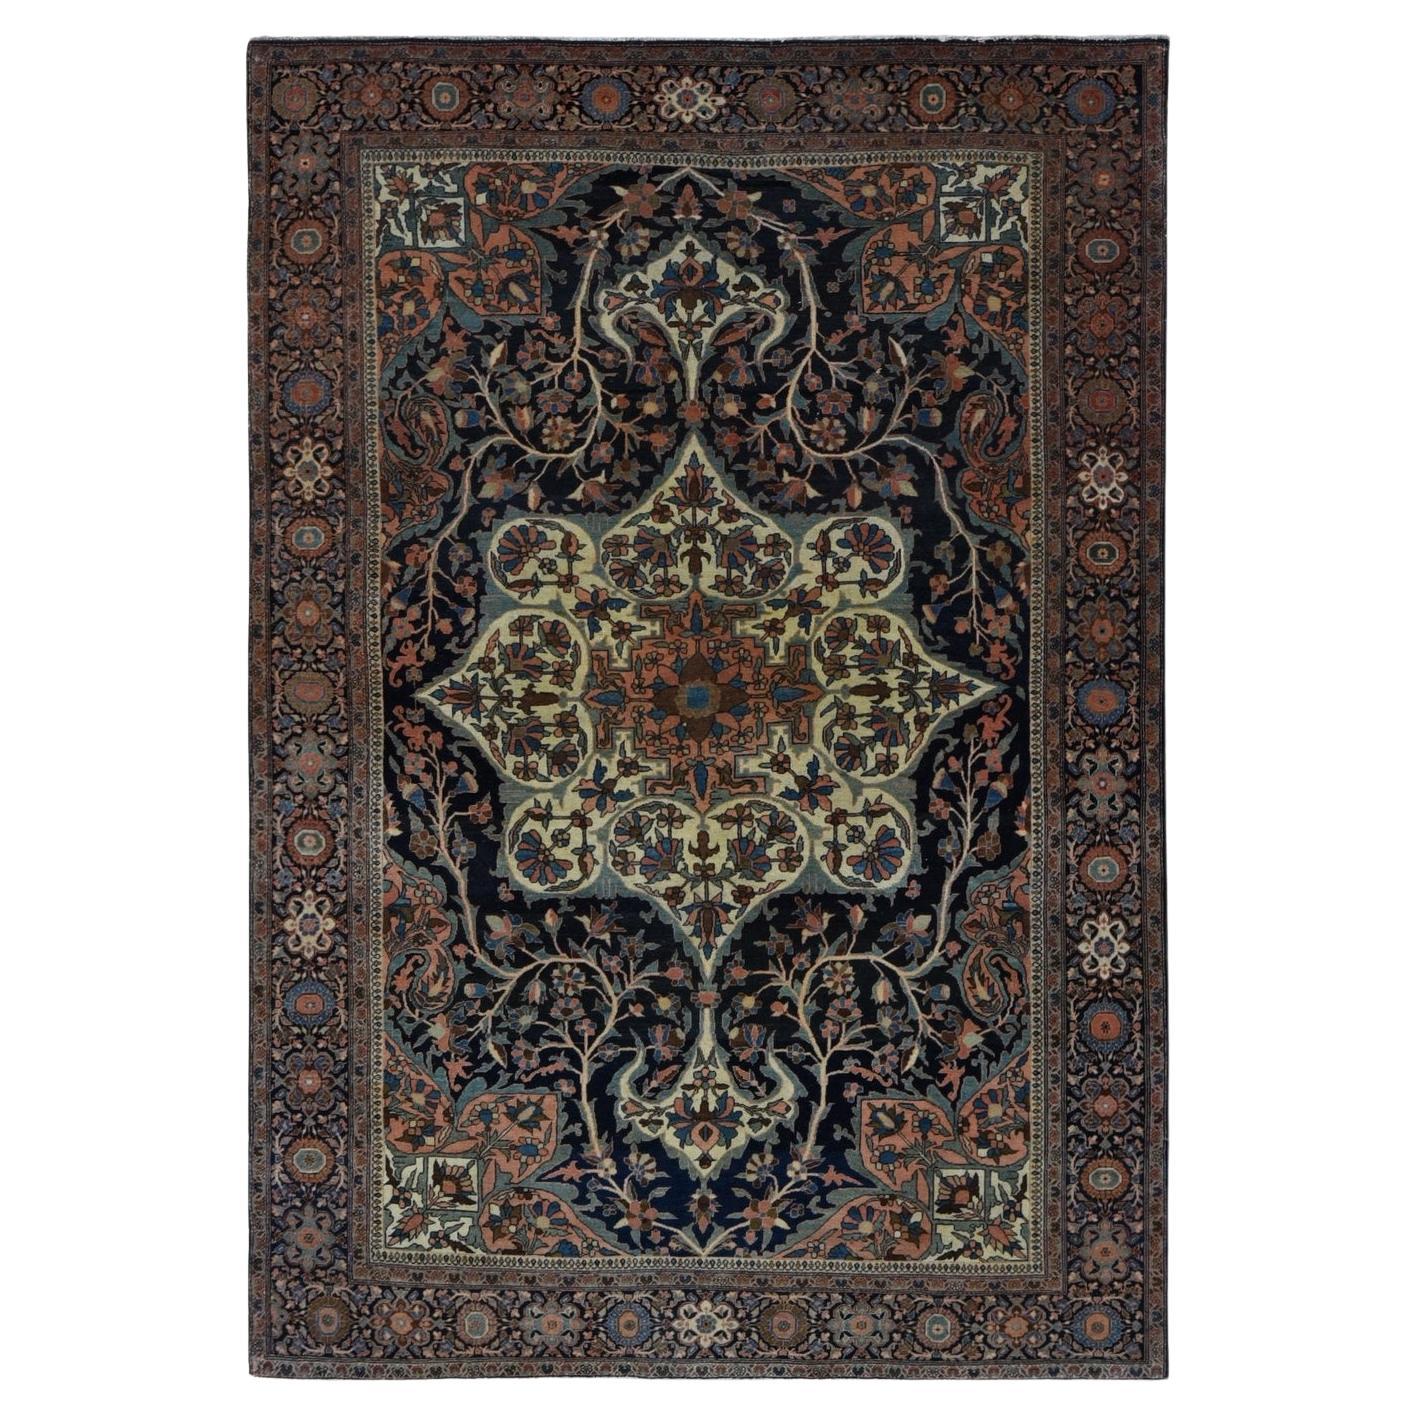 Brown Antique Persian Fereghan Sarouk Clean Soft Even Wear Wool Hand Knotted Rug im Angebot